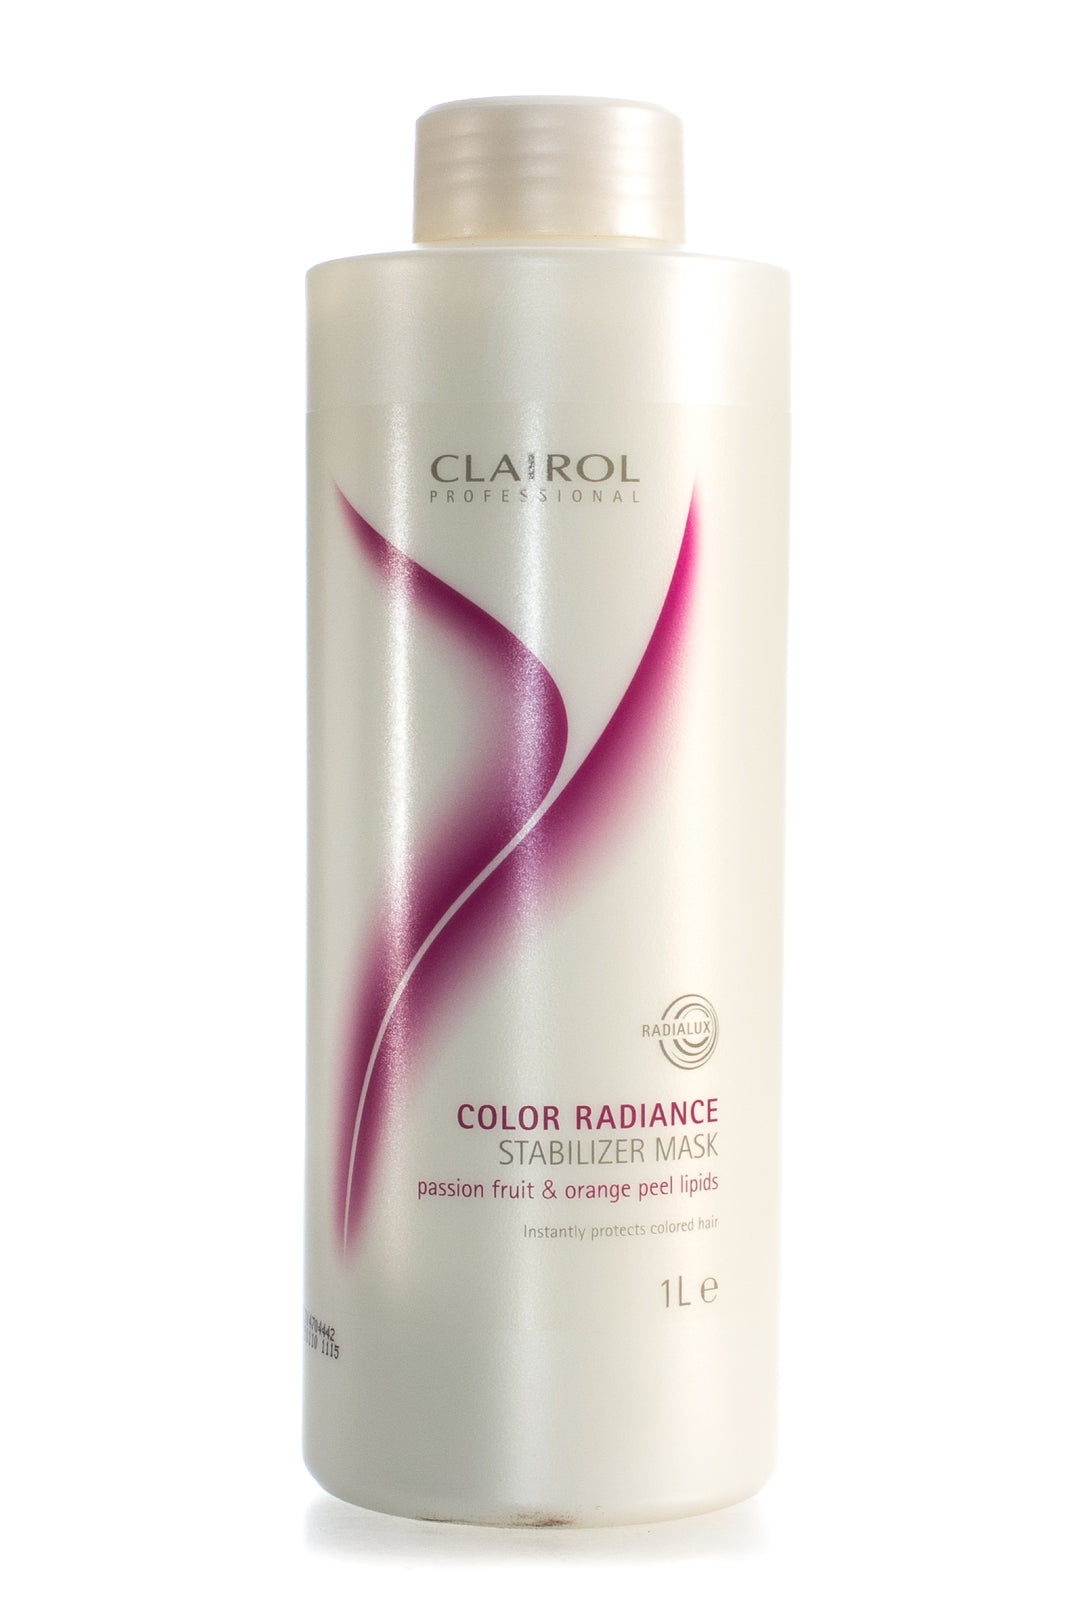 CLAIROL PROFESSIONAL COLOR RADIANCE STABILIZER MASK 1L